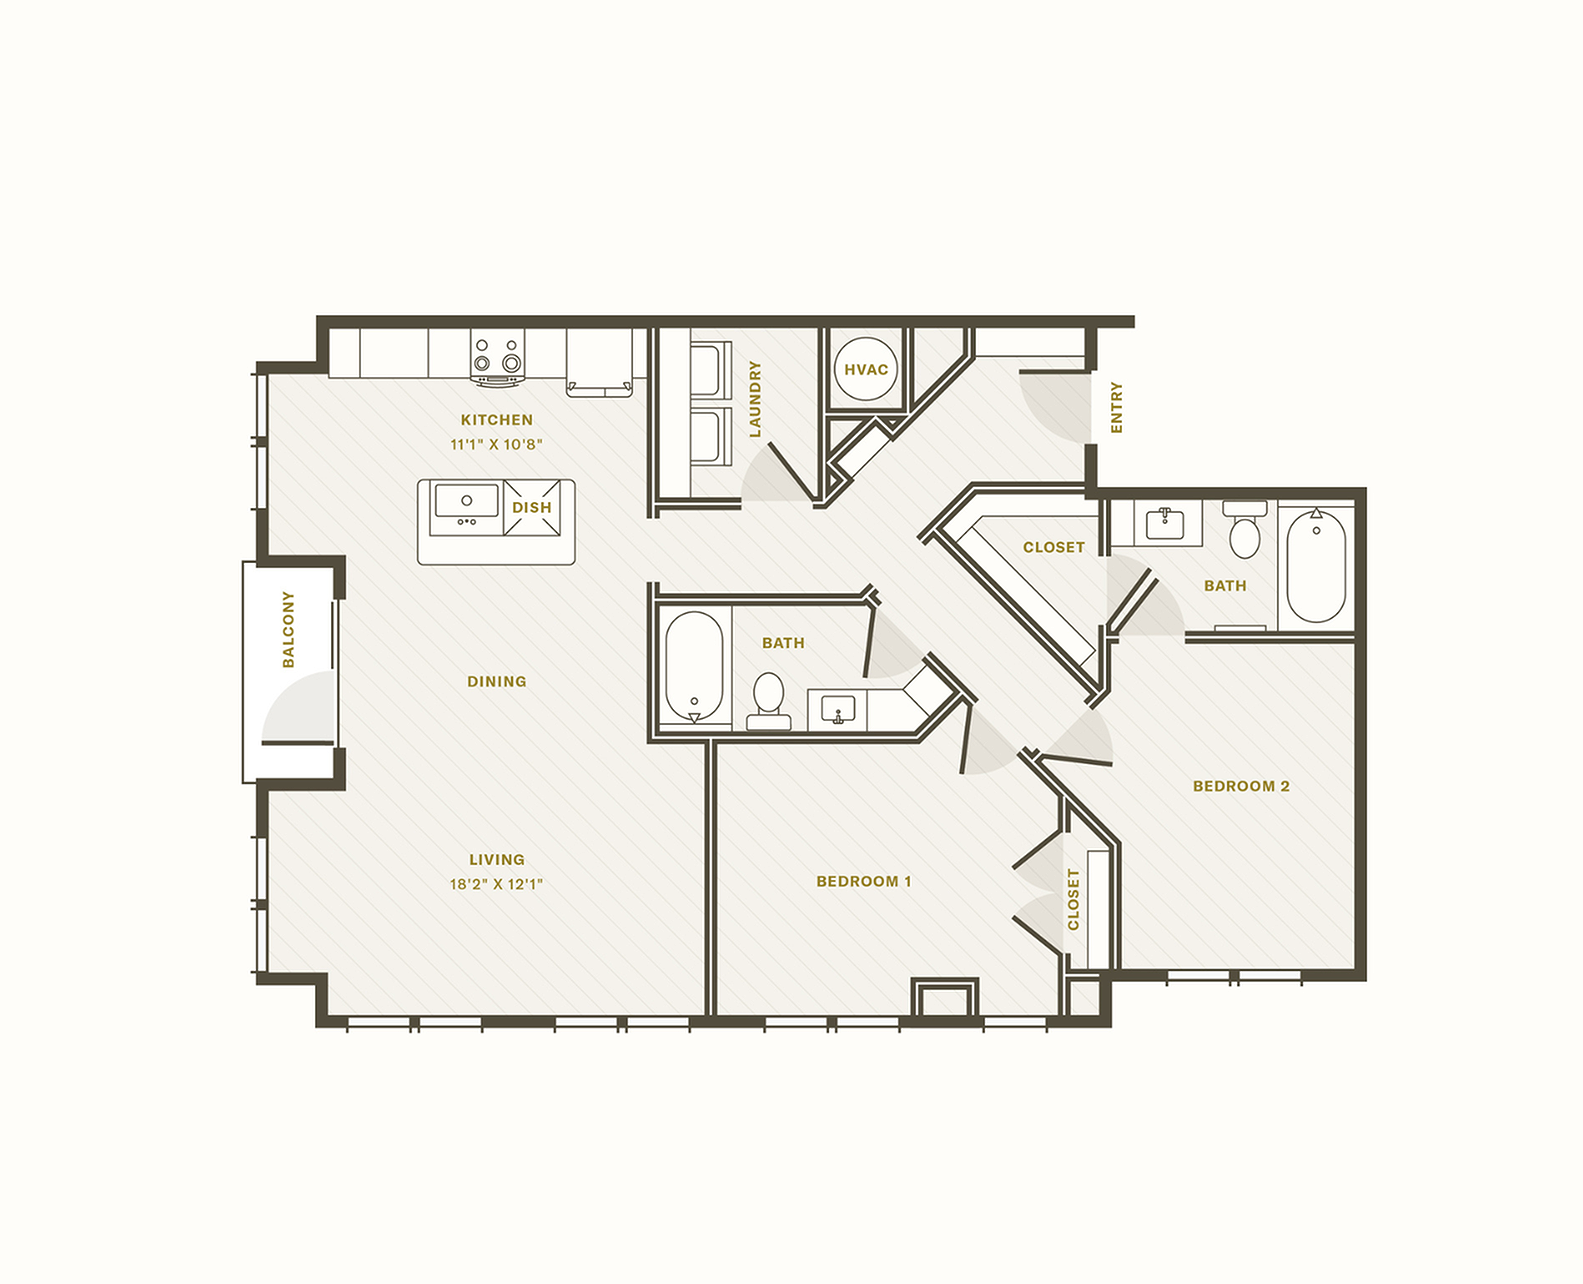 The French floor plan